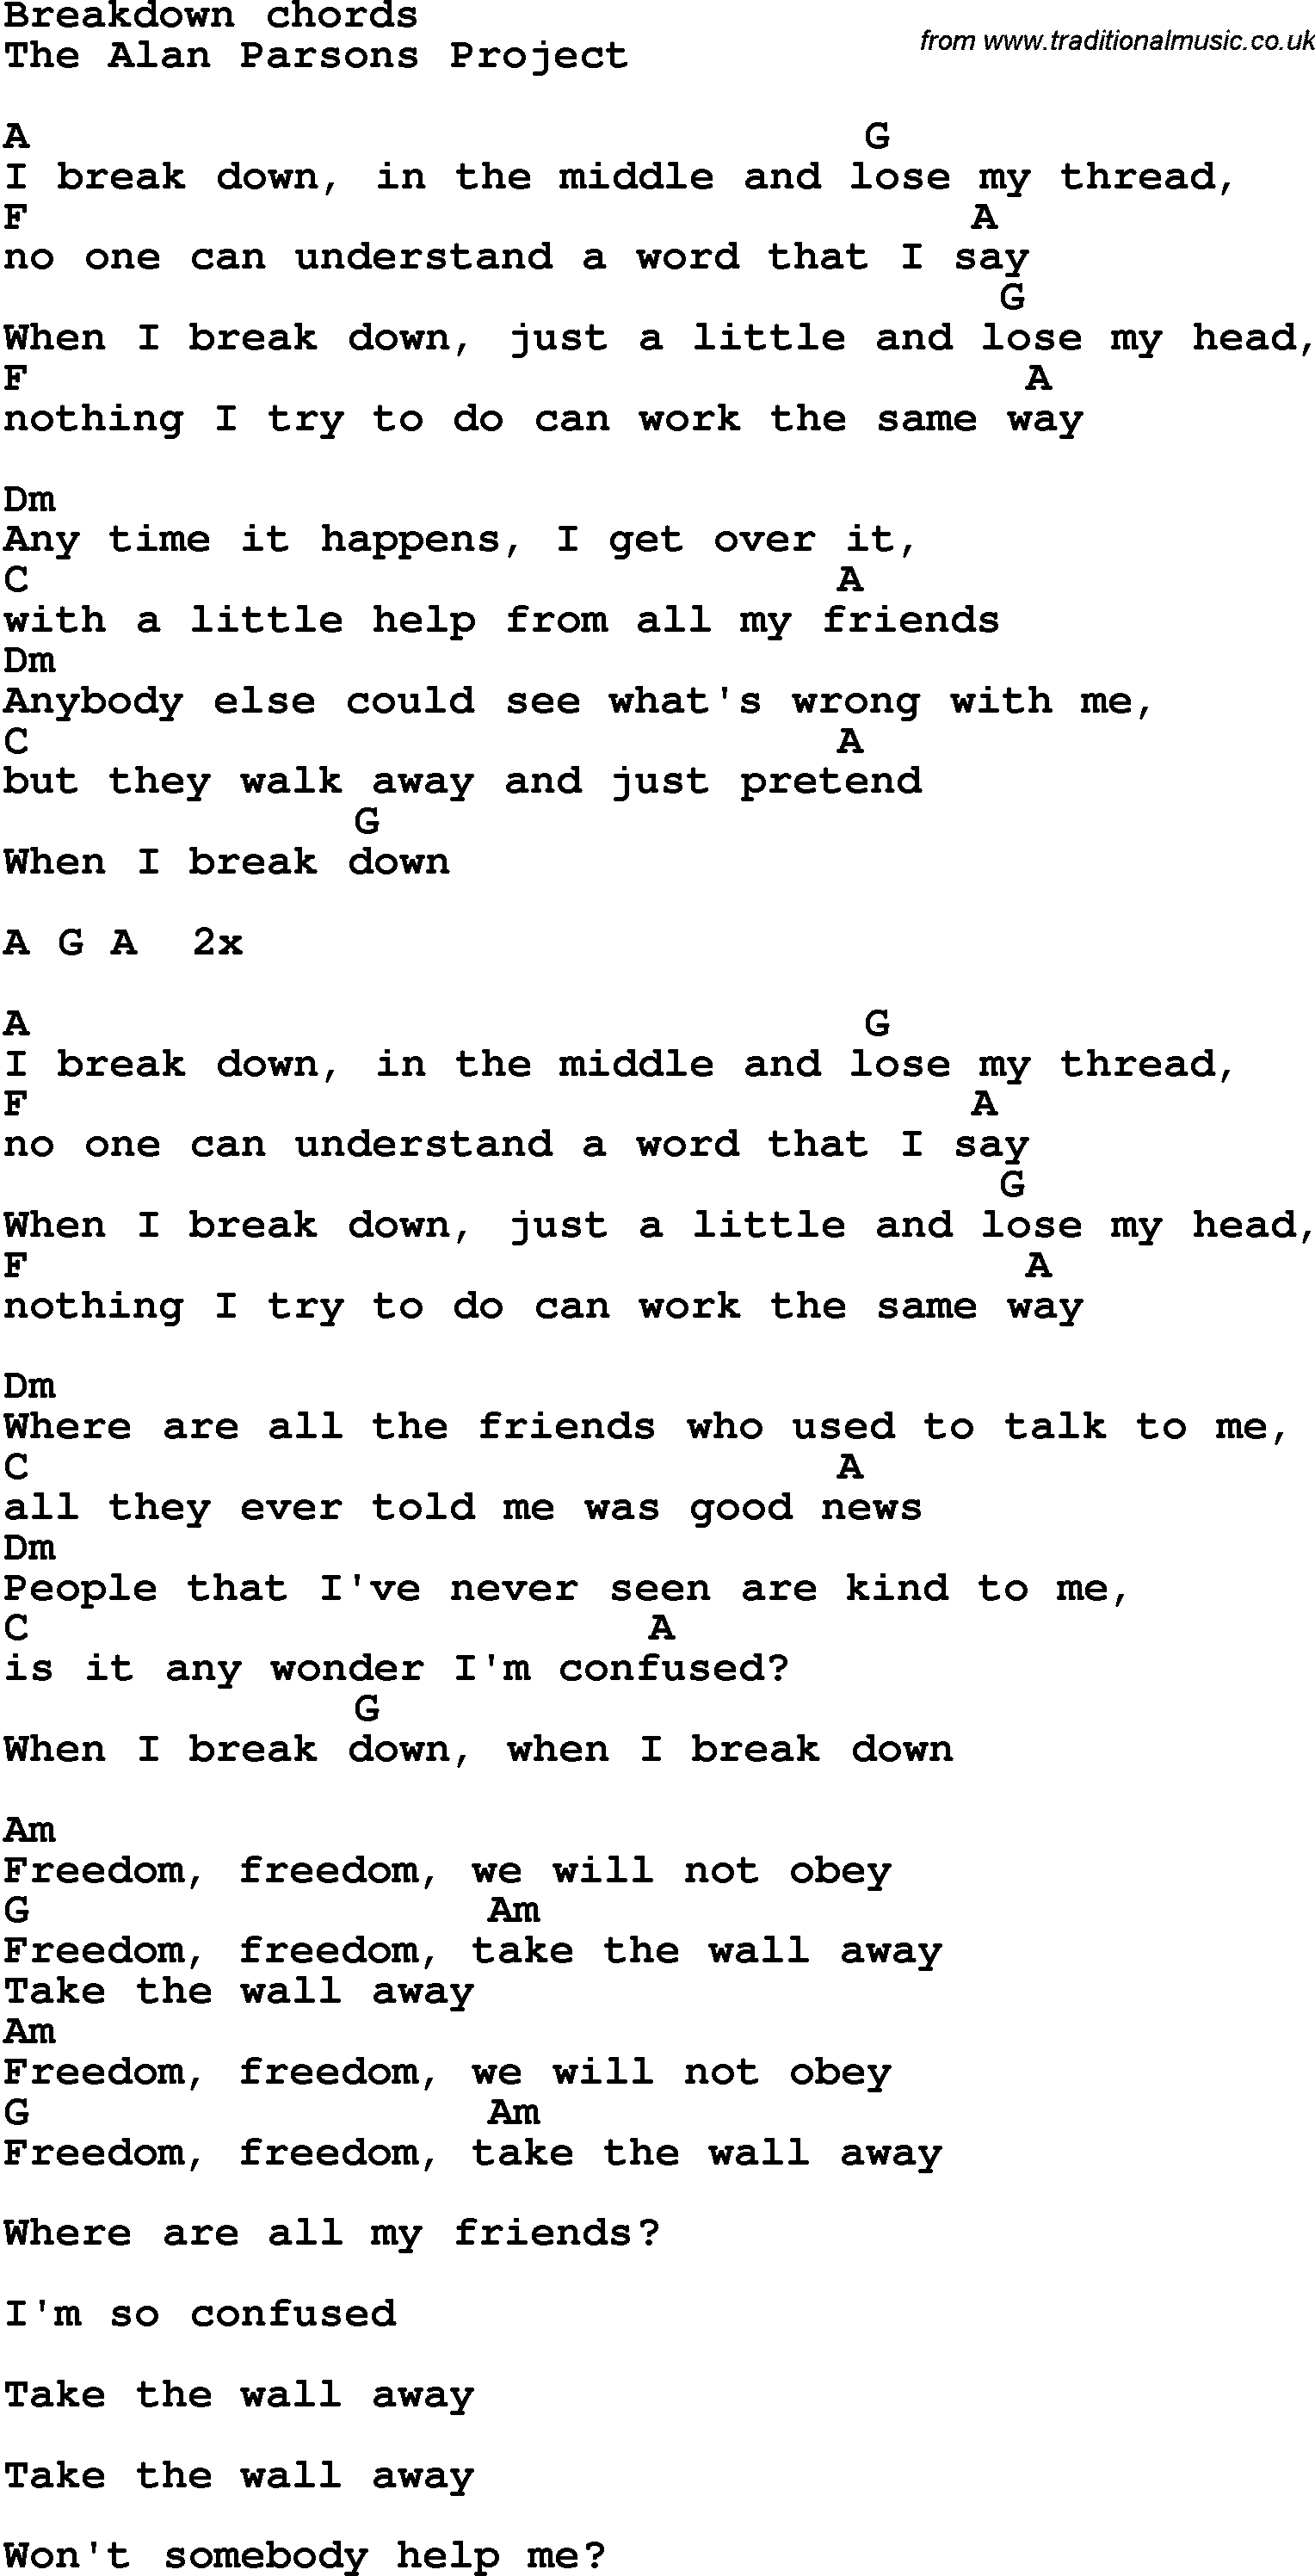 Song Lyrics with guitar chords for Breakdown